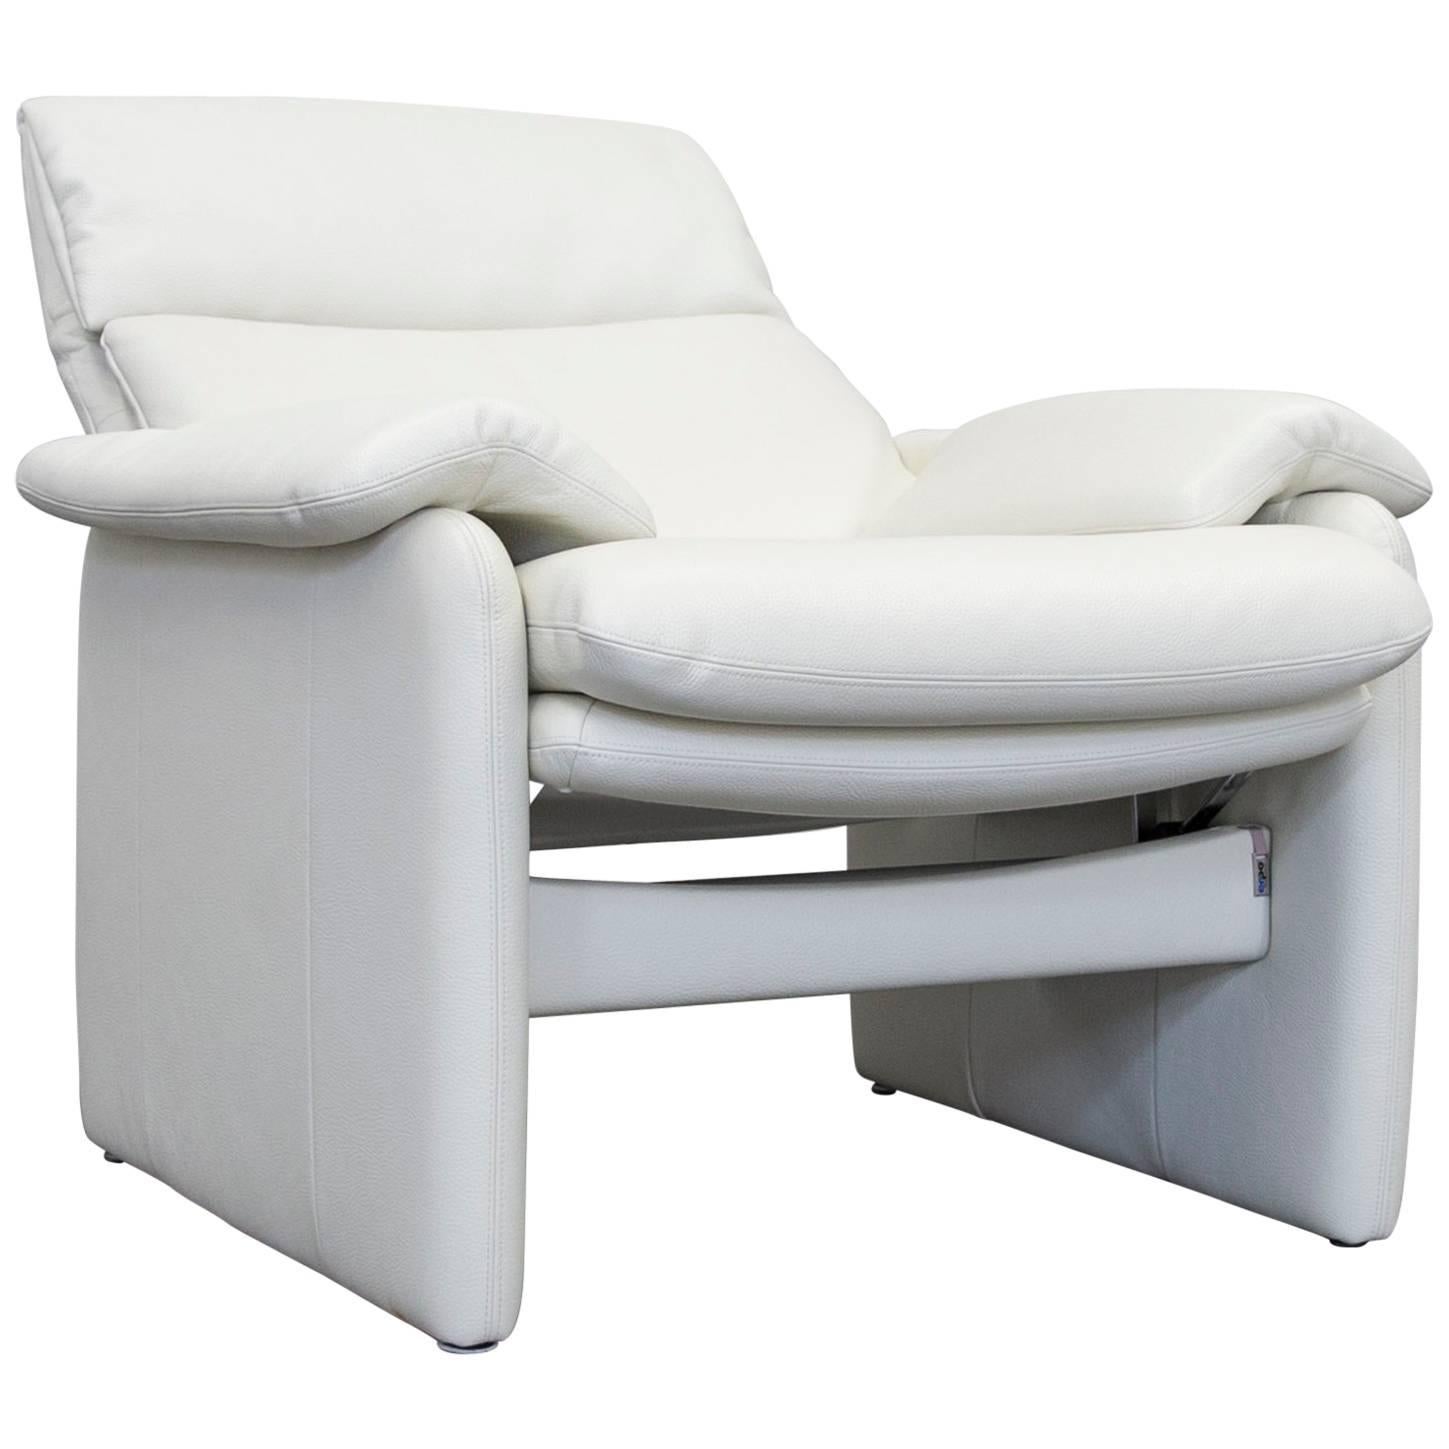 Erpo Lugano Designer Armchair Leather Crème White Two-Seat Couch Function For Sale